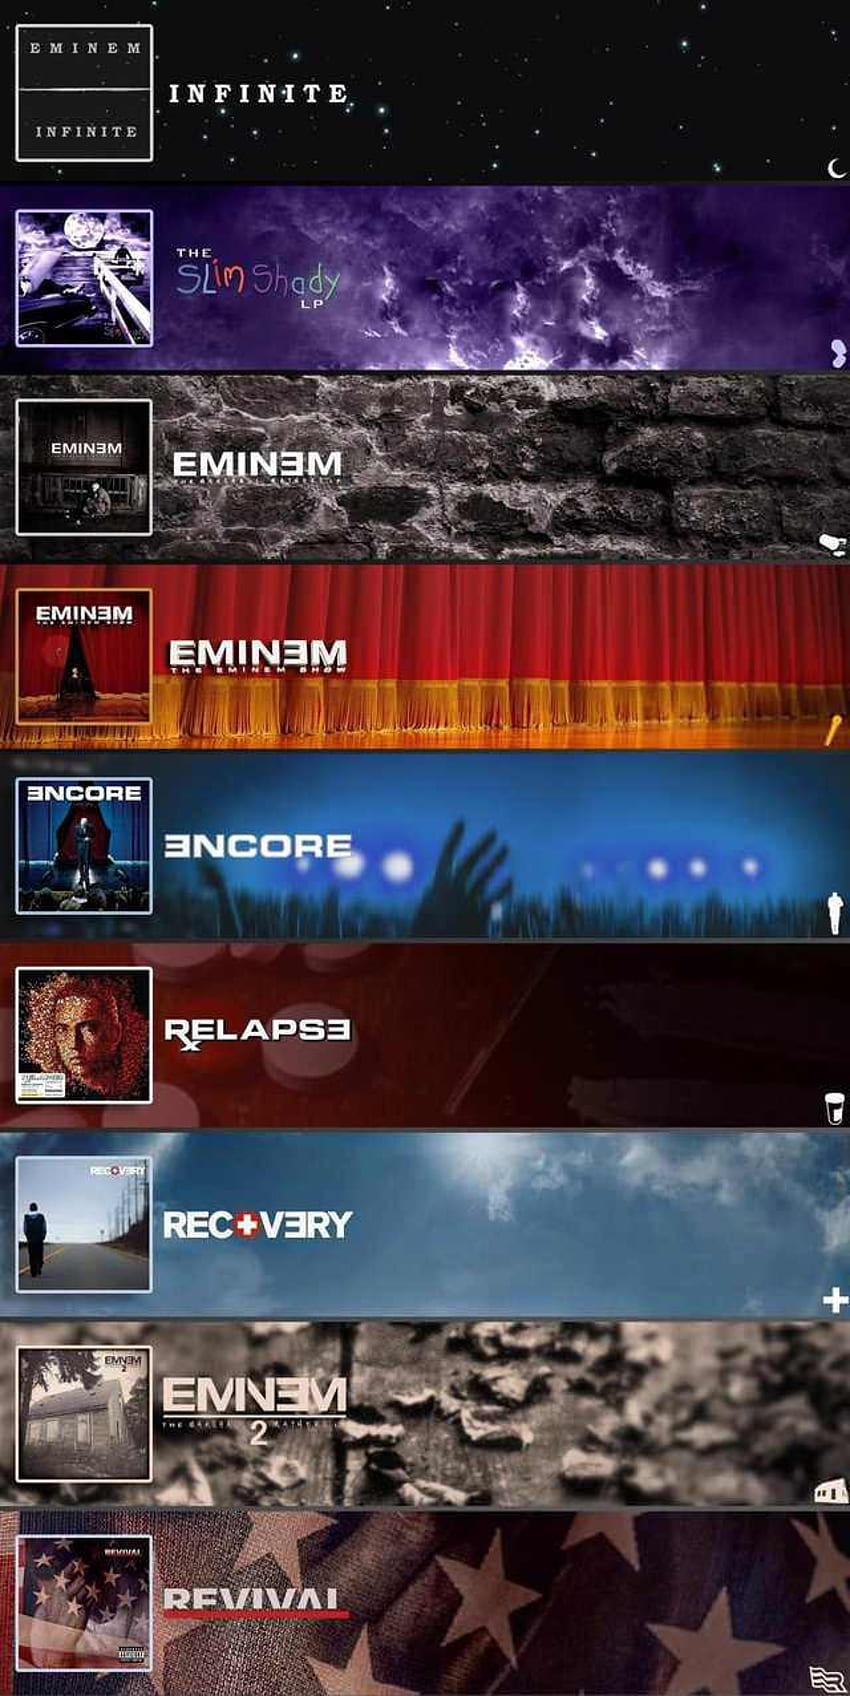 Can someone make another like this with Kamikaze added? : Eminem, Eminem MMLP 2 HD phone wallpaper